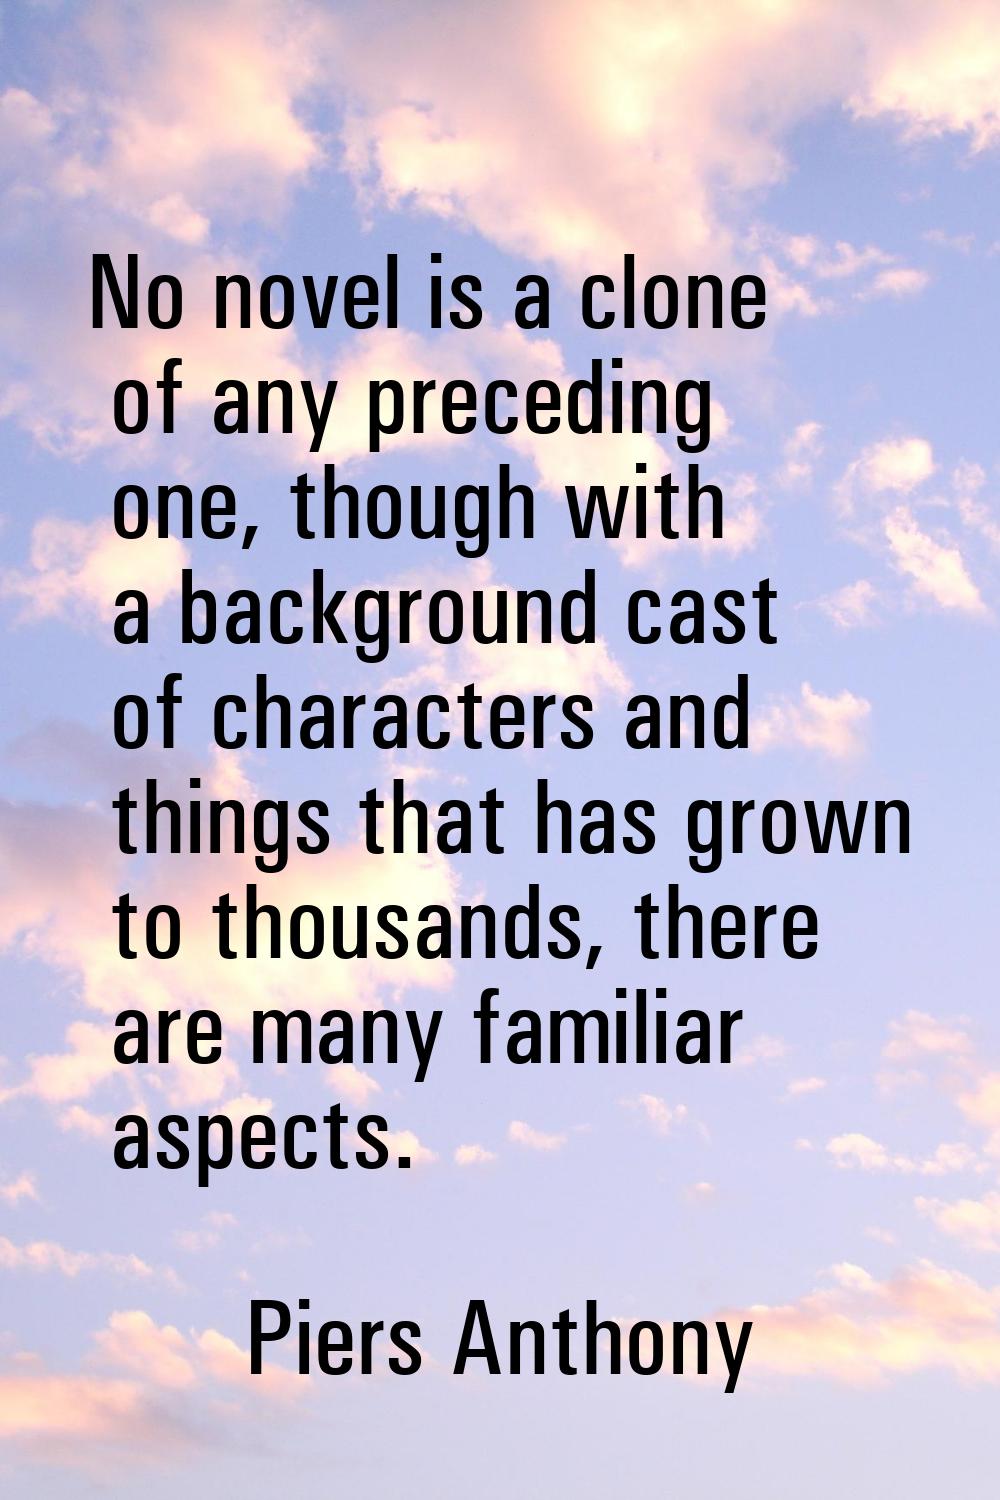 No novel is a clone of any preceding one, though with a background cast of characters and things th